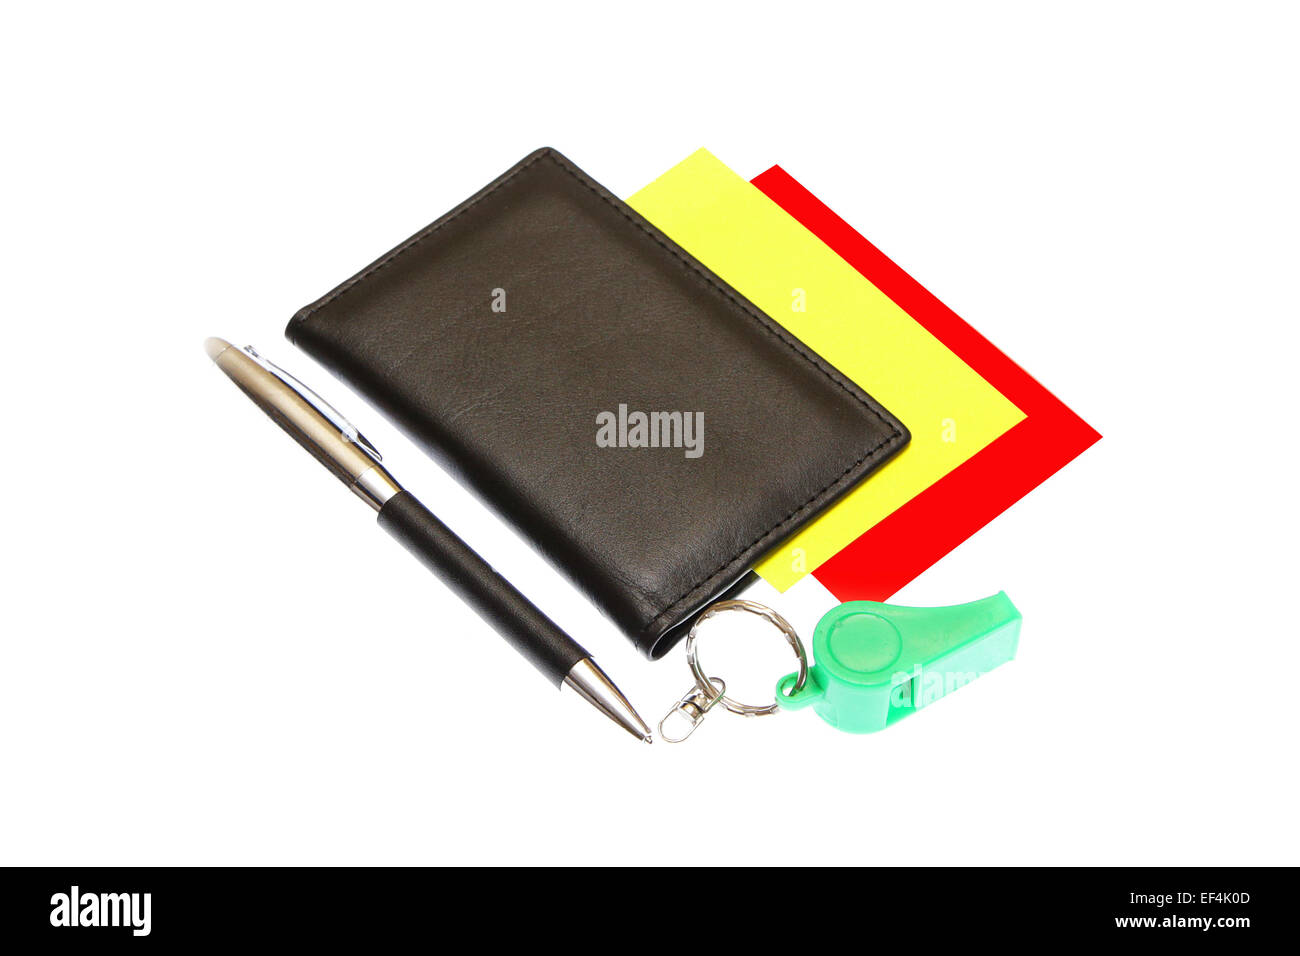 green plastic whistle and red card on white background Stock Photo